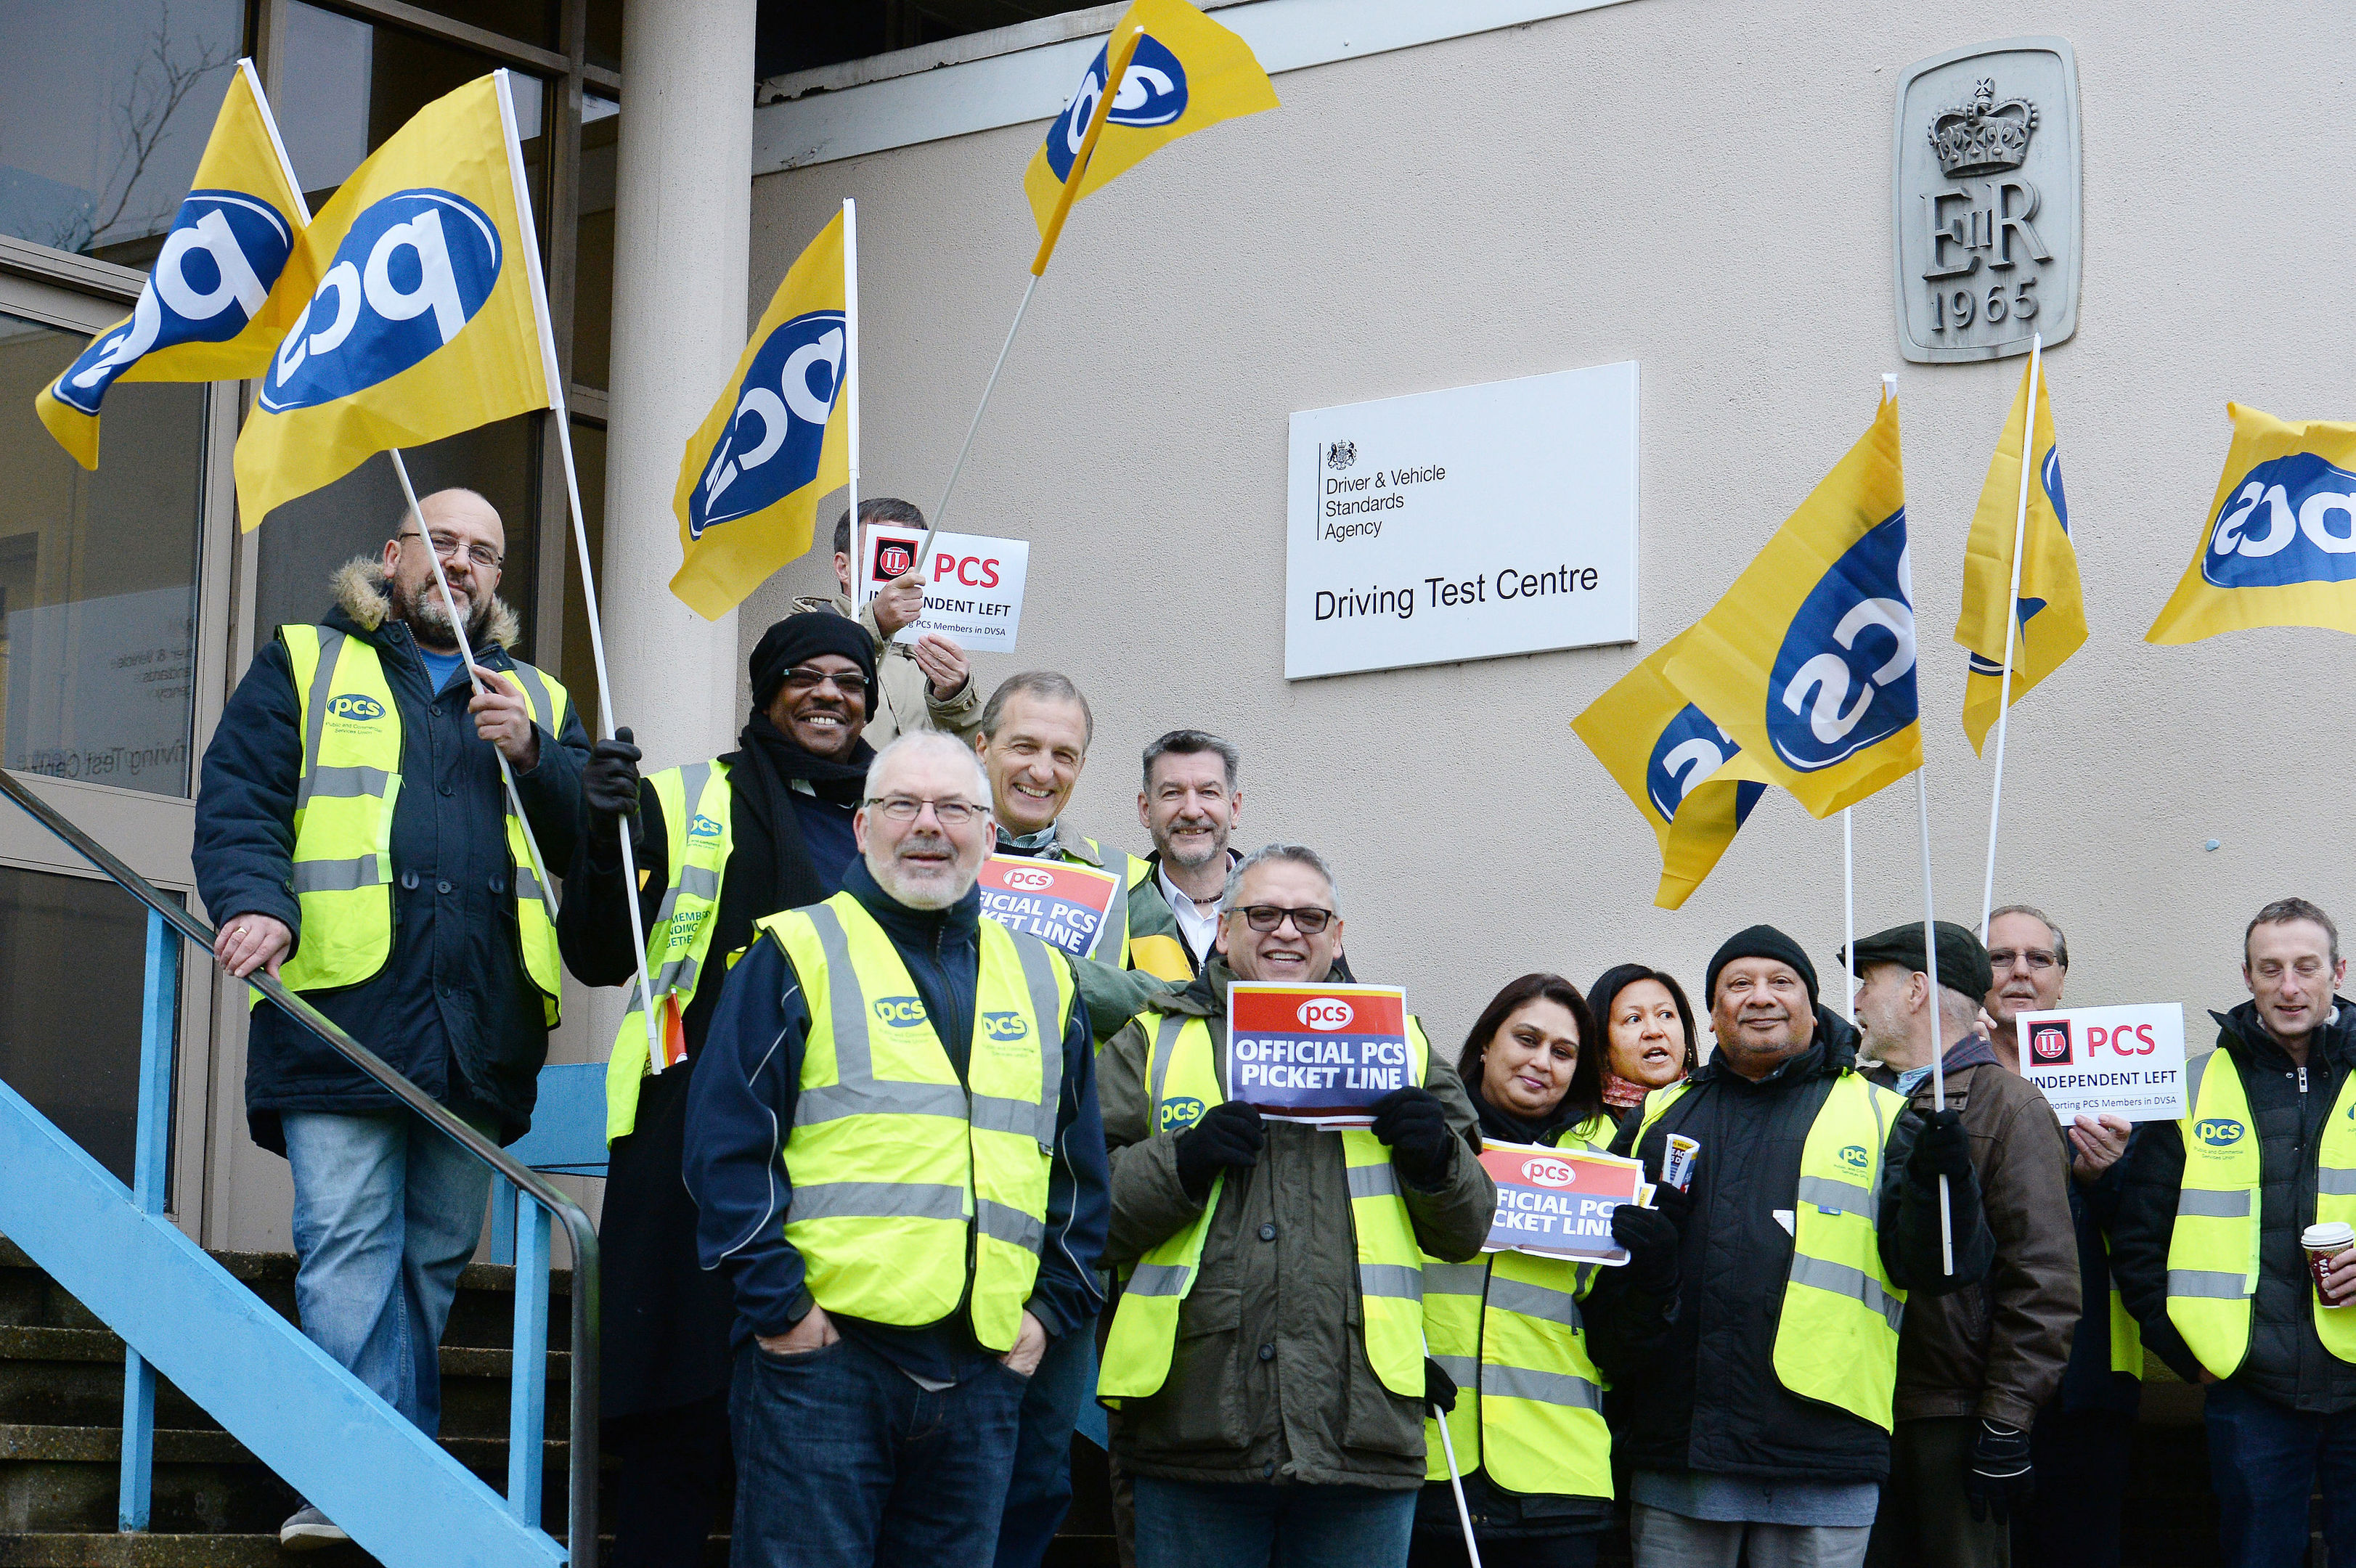 A group of driving examiners on a picket line outside the driving test centre in Barnet, north London yesterday